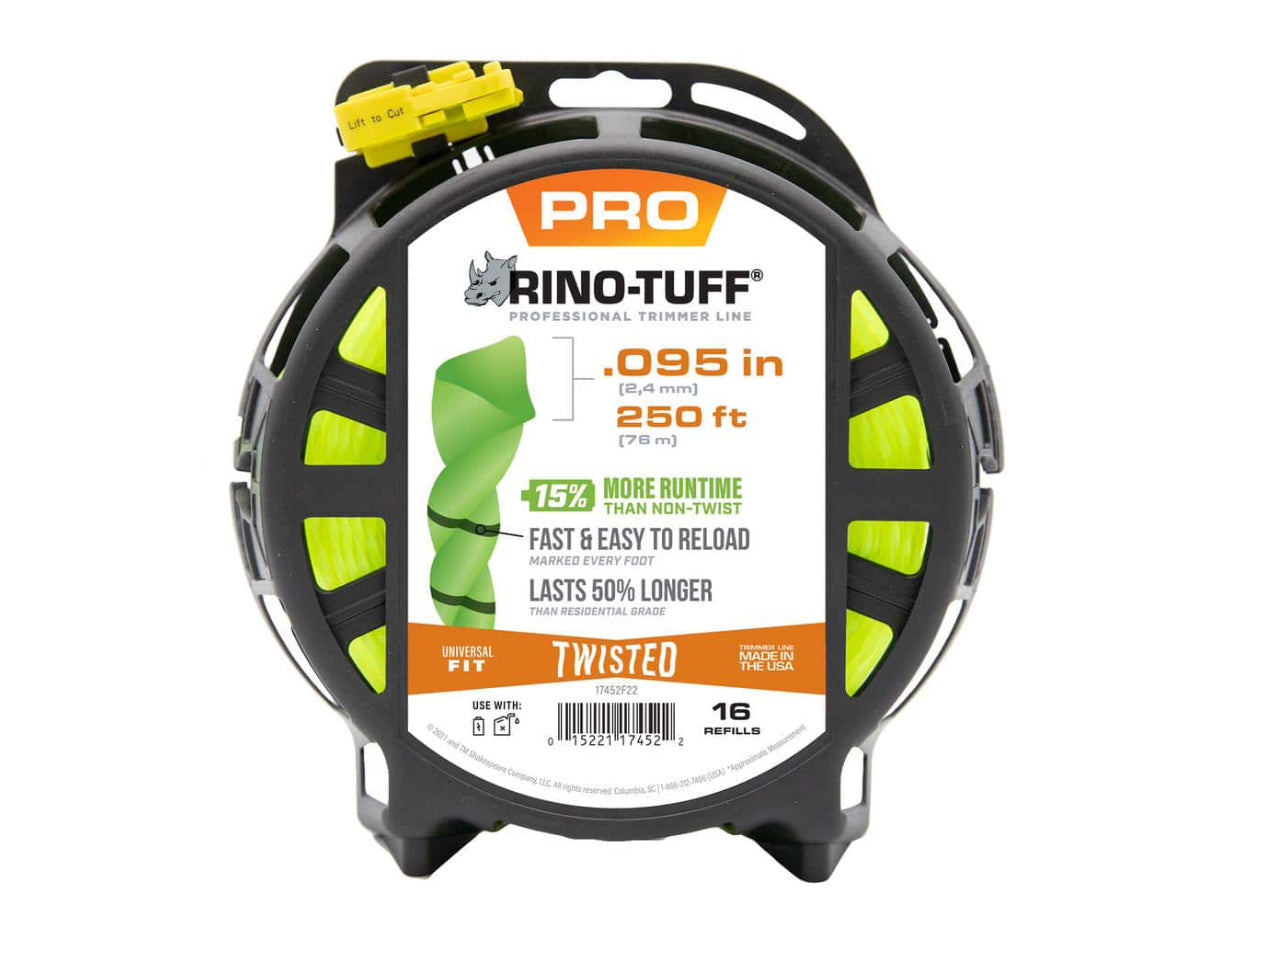 Rino-Tuff Universal Fit .095 in. x 250 ft. Pro Twisted Line for Gas and Select Cordless String Grass Trimmer/Lawn Edger